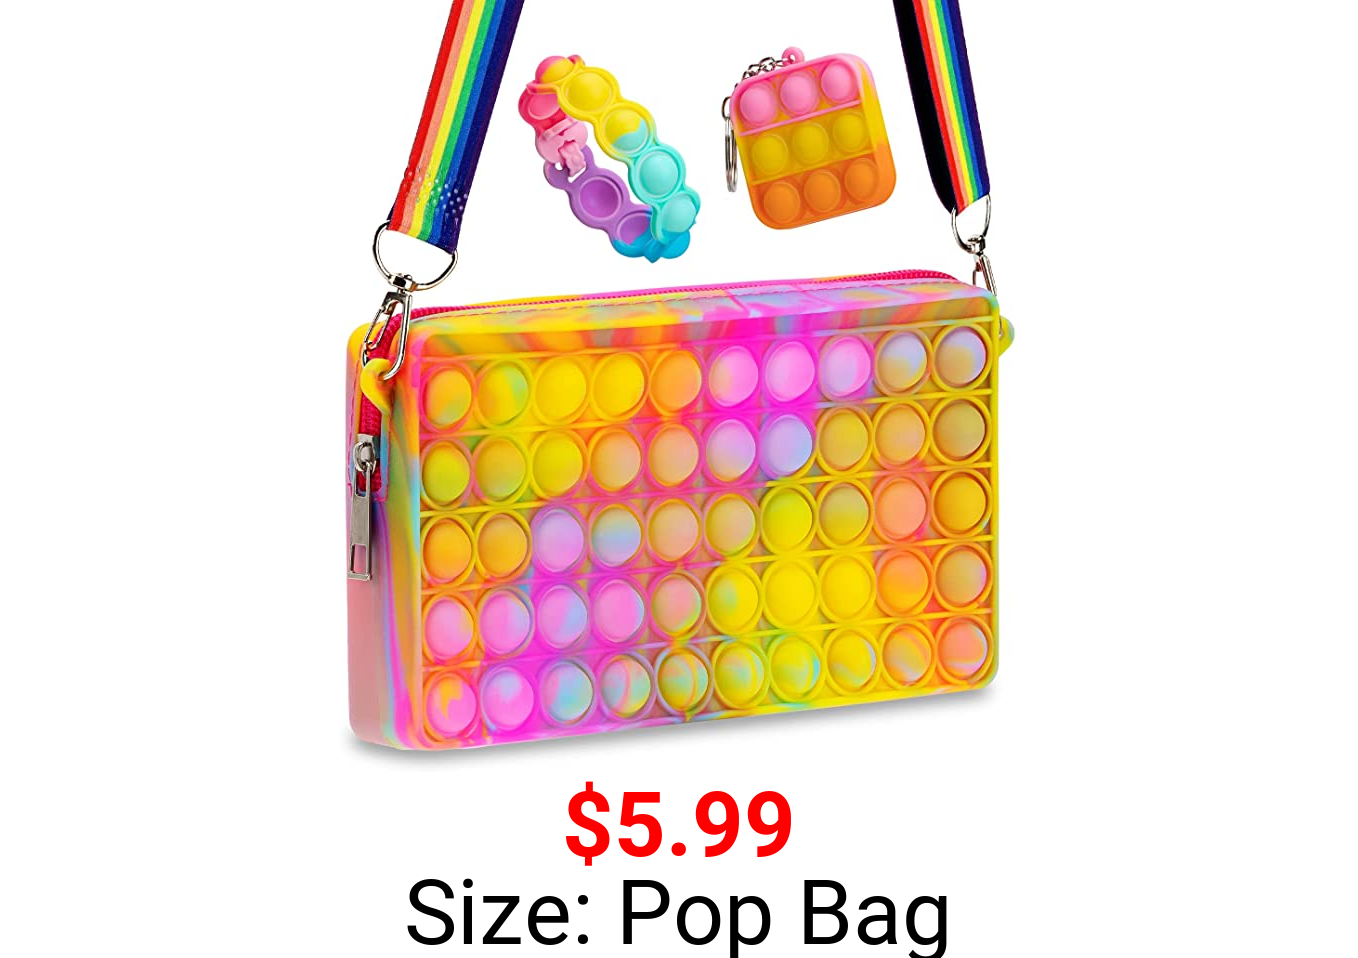 Pop Purse for Girls Shoulder Bag Fidget Toys Handbags Easter Gifts for Kids , Sensory Stress Relief Toy , Party Birthday Gifts for Kids ( Includes A Pop Keychain and Bracelet )